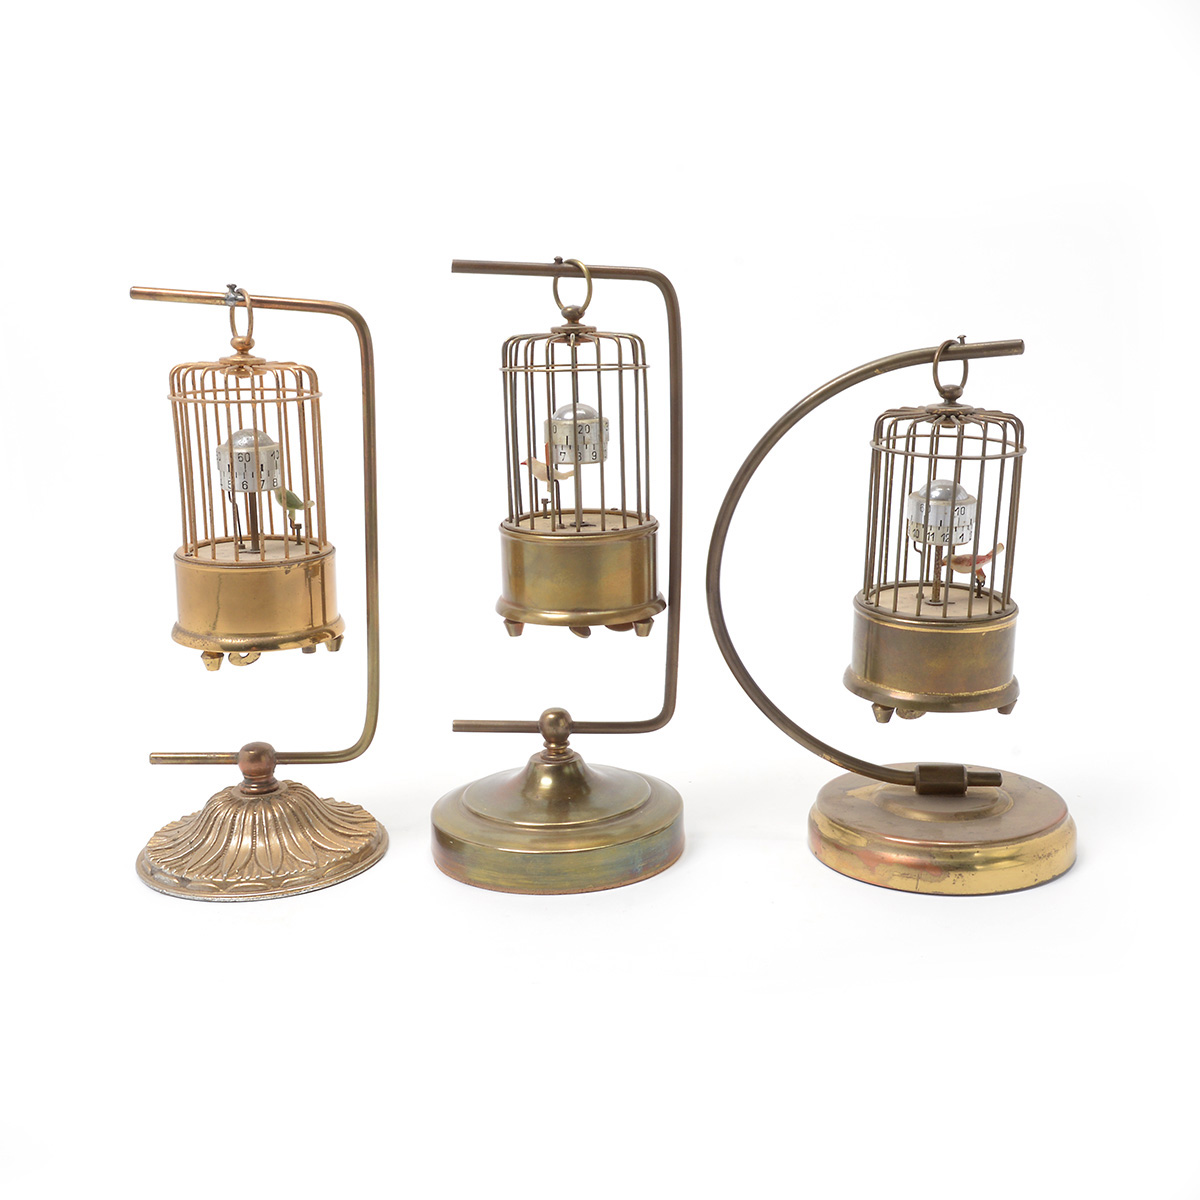 Three Hanging Birdcage Music Boxes with Clock Mechanism - Image 3 of 13